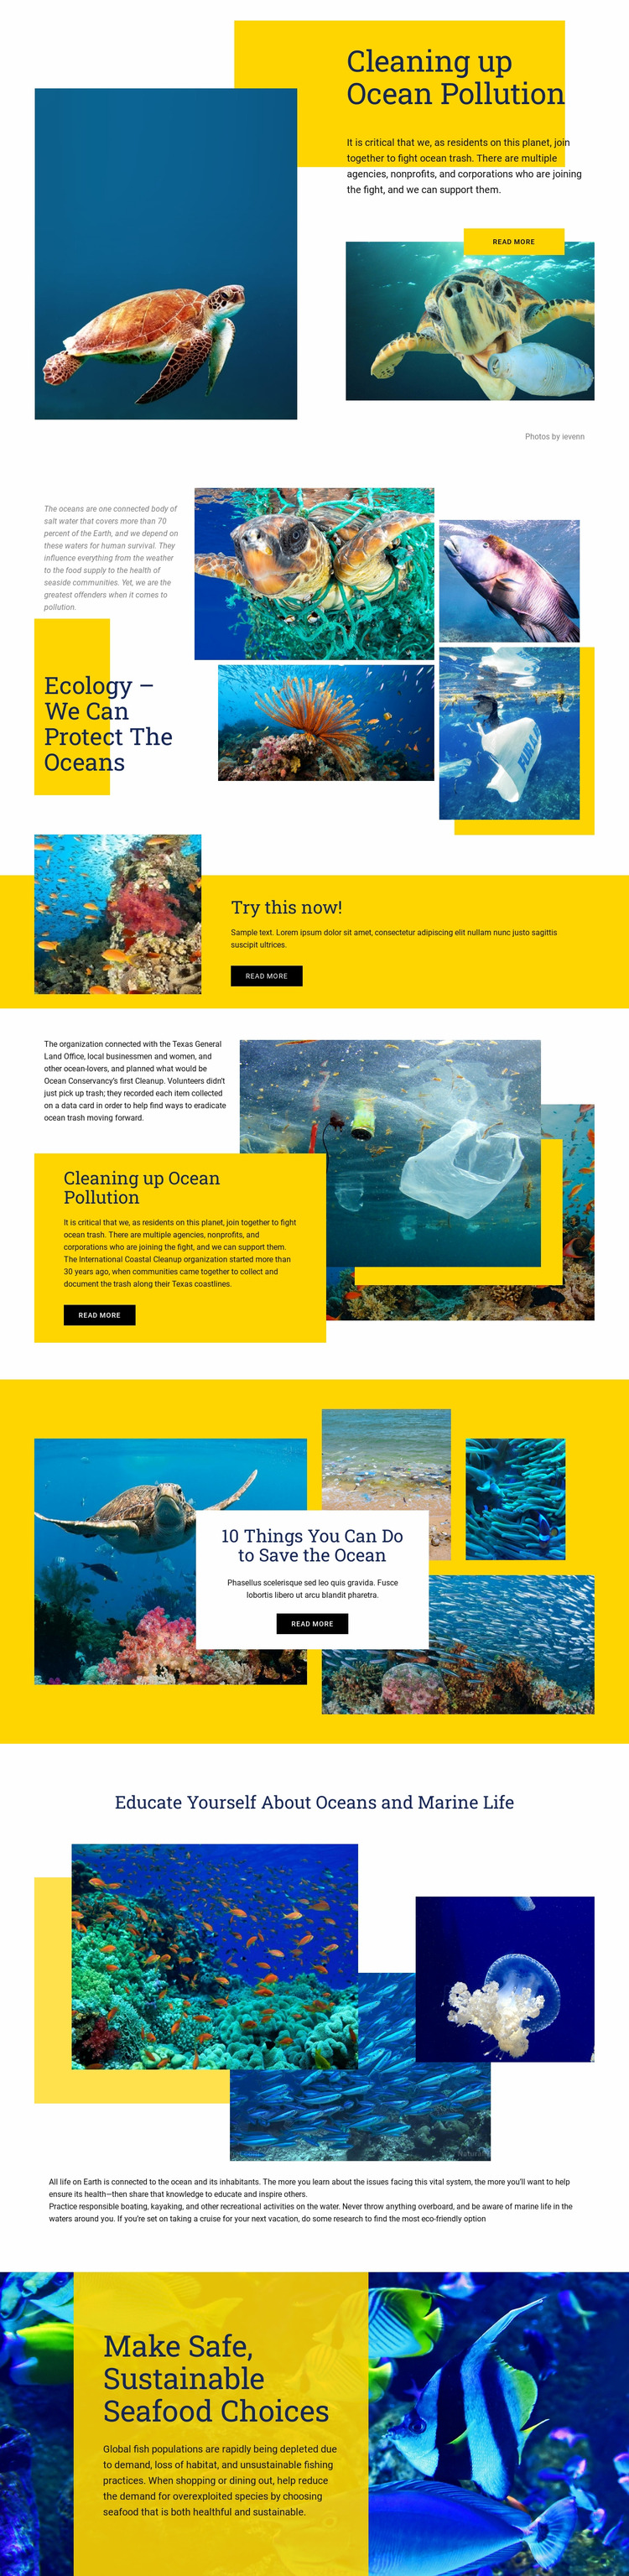 Protect The Oceans Html Website Builder